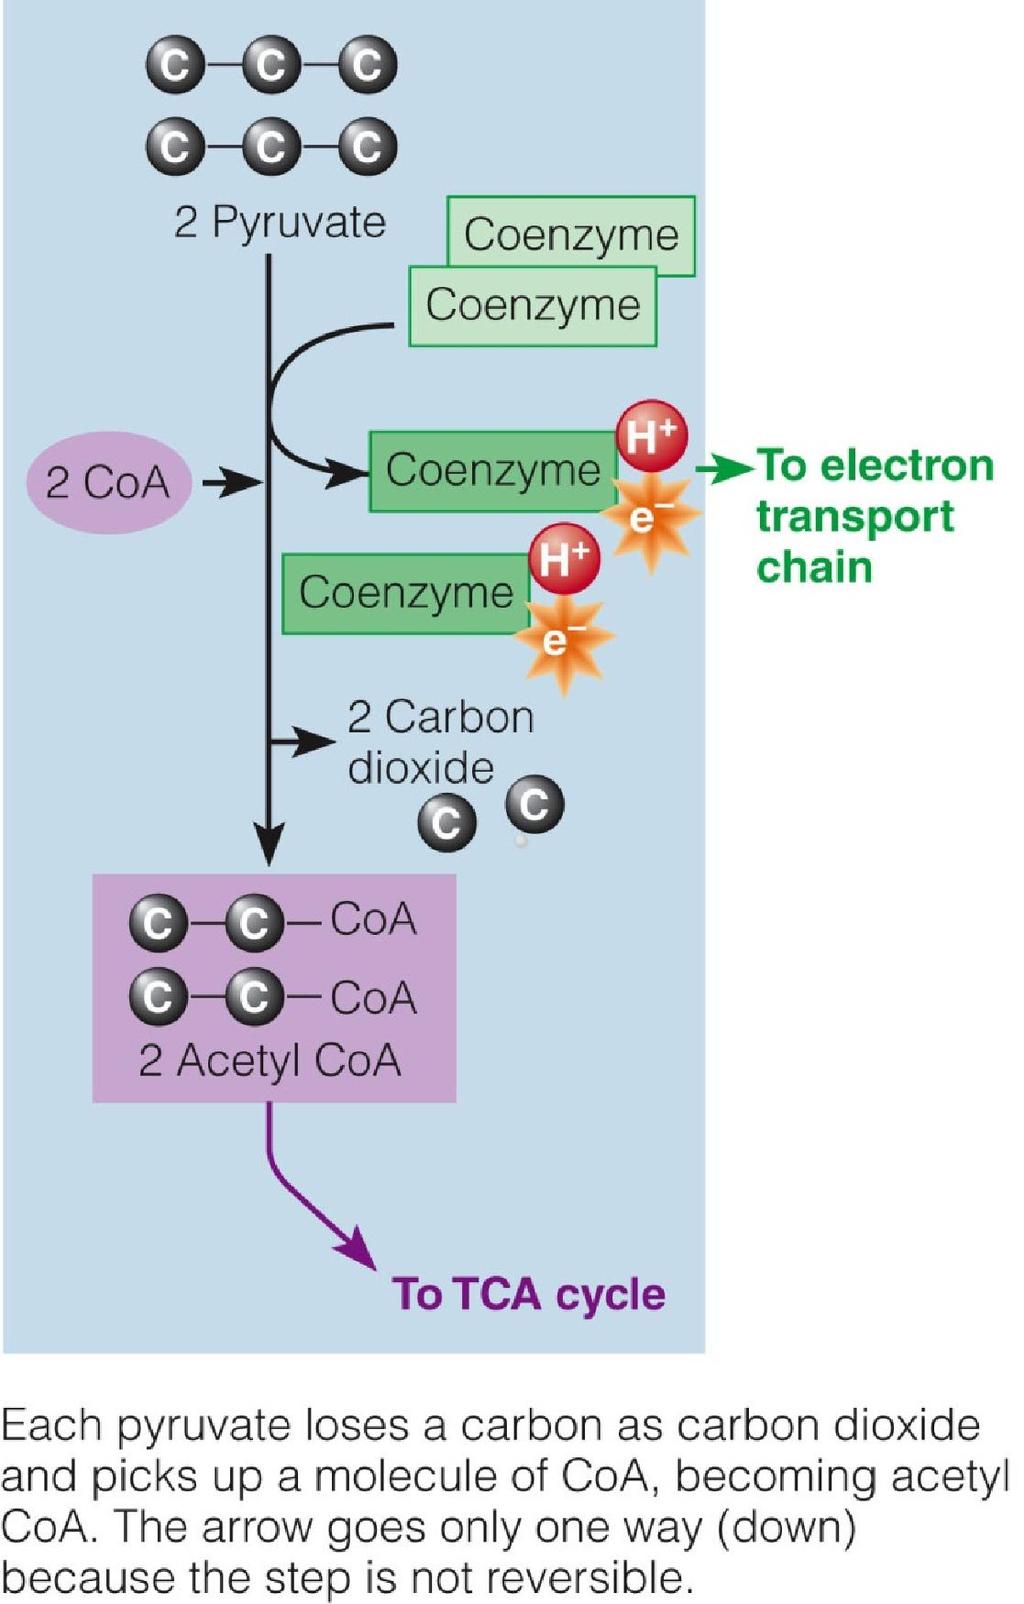 Glycolysis: Pyruvate to Acetyl CoA If cells need energy AND oxygen is available pyruvate